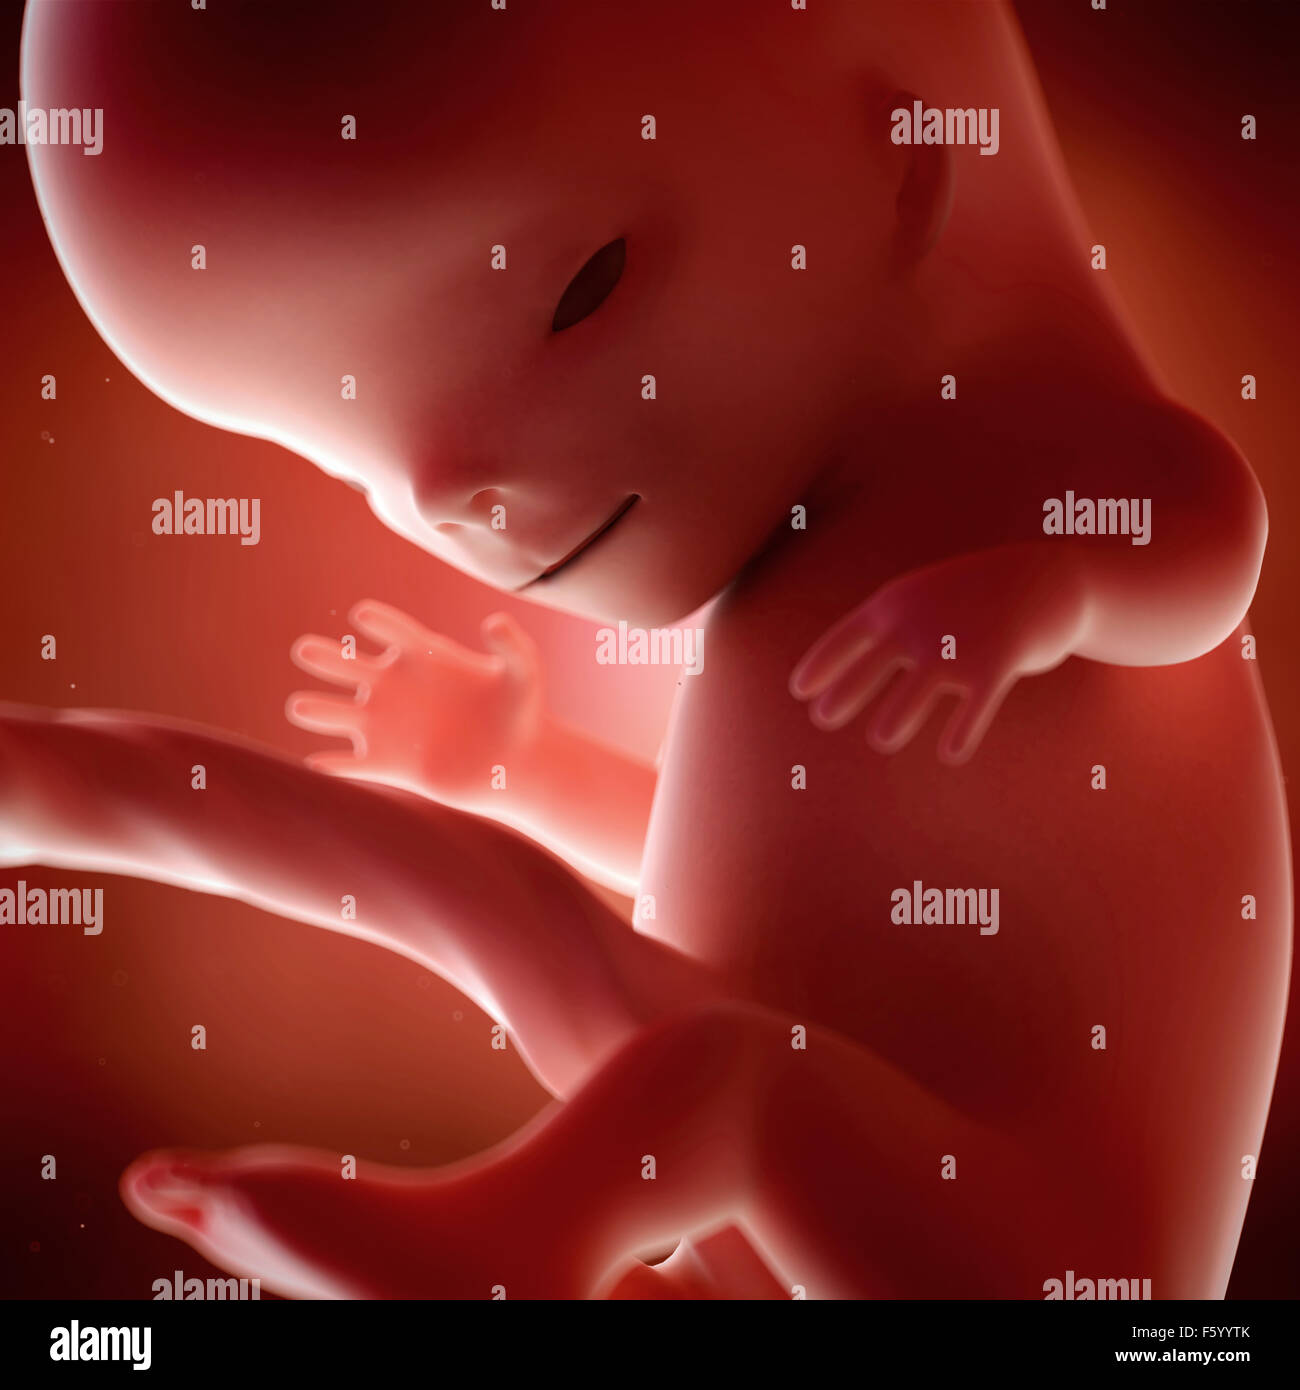 medical accurate 3d illustration of a fetus week 11 Stock Photo